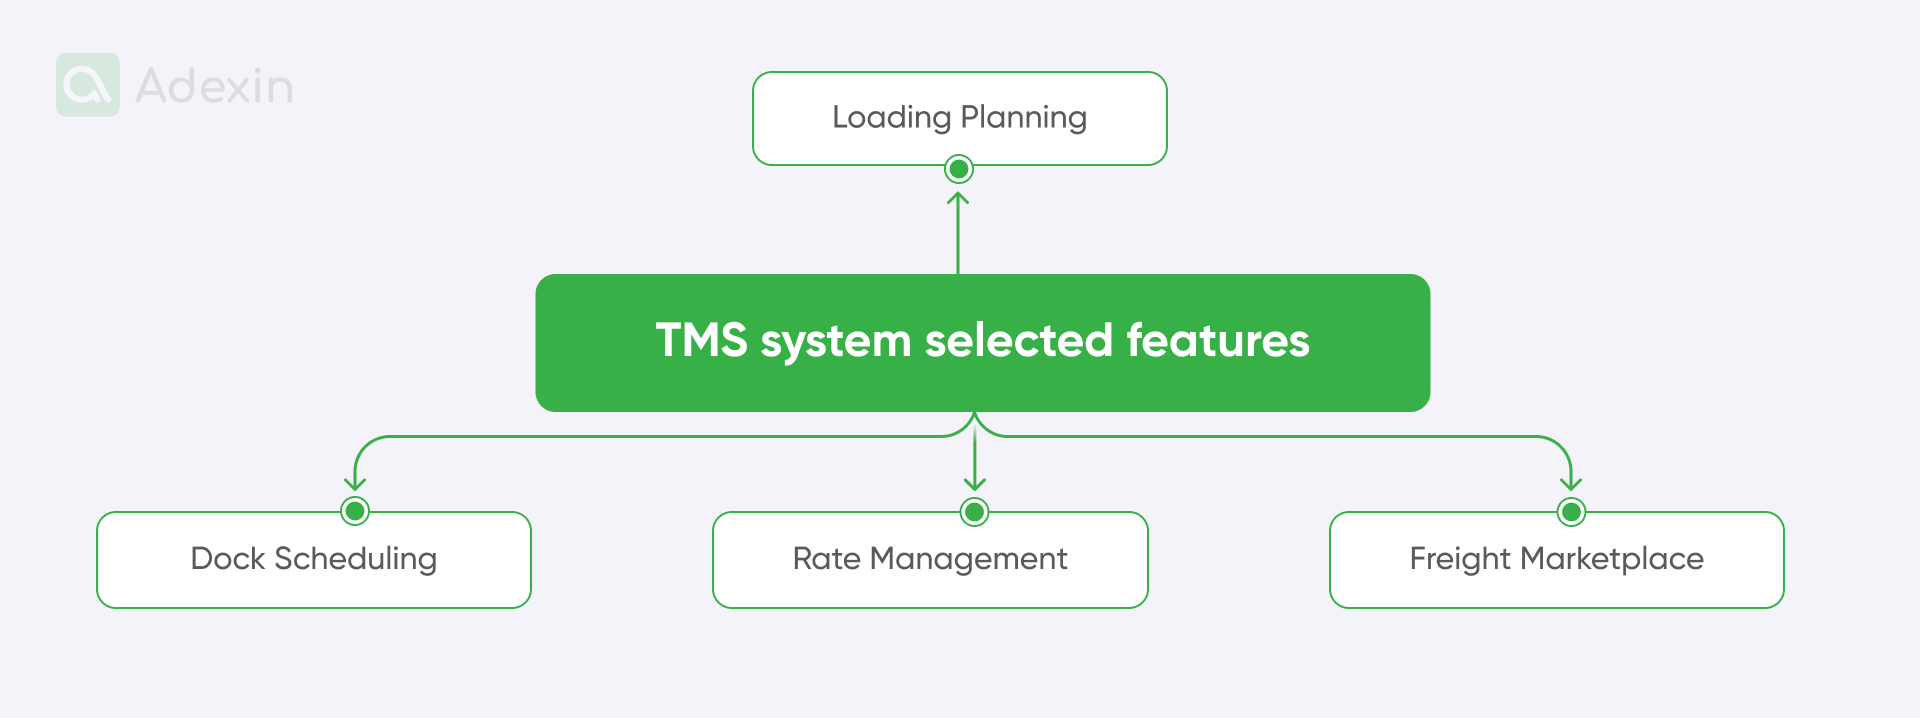 TMS system selected features